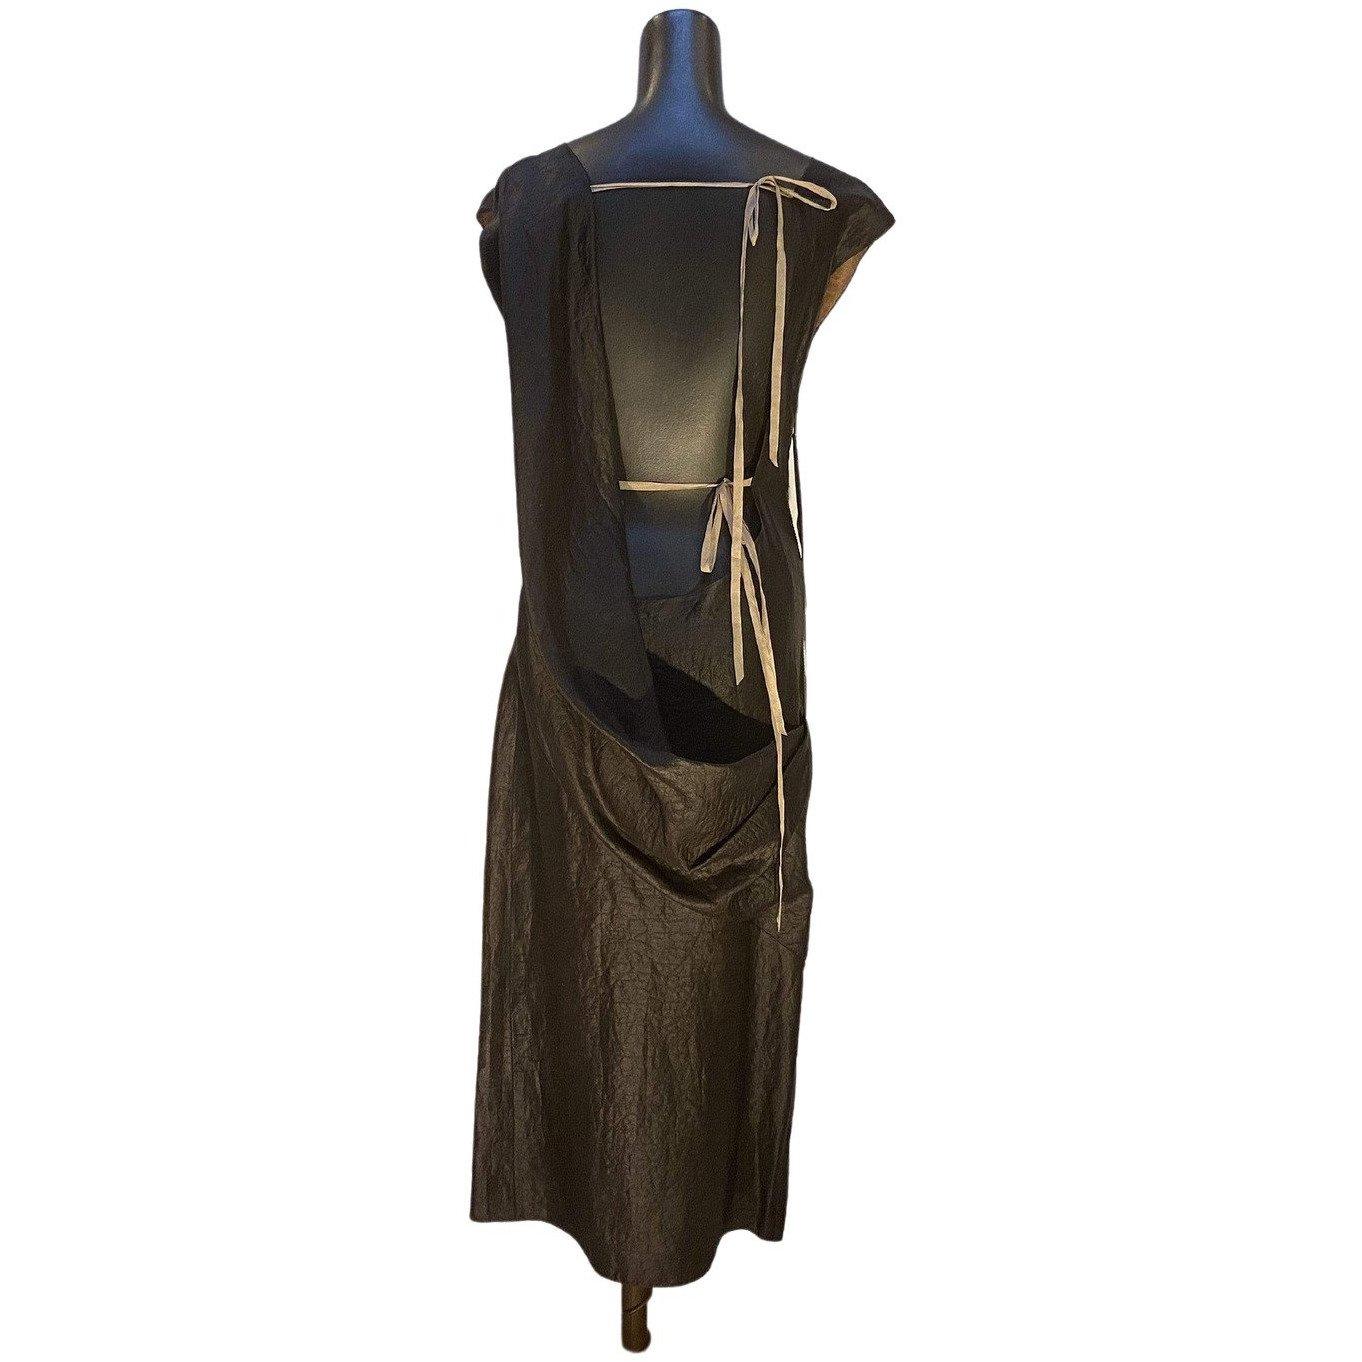 Gorgeous dark brown, acid-washed, sleeveless dress from vintage Thimister is 100% silk. The eye-catching deep draping in back is delicately secured by two sets of ribbons tied across the back, wrapping your body like a gift. The heavy-duty side